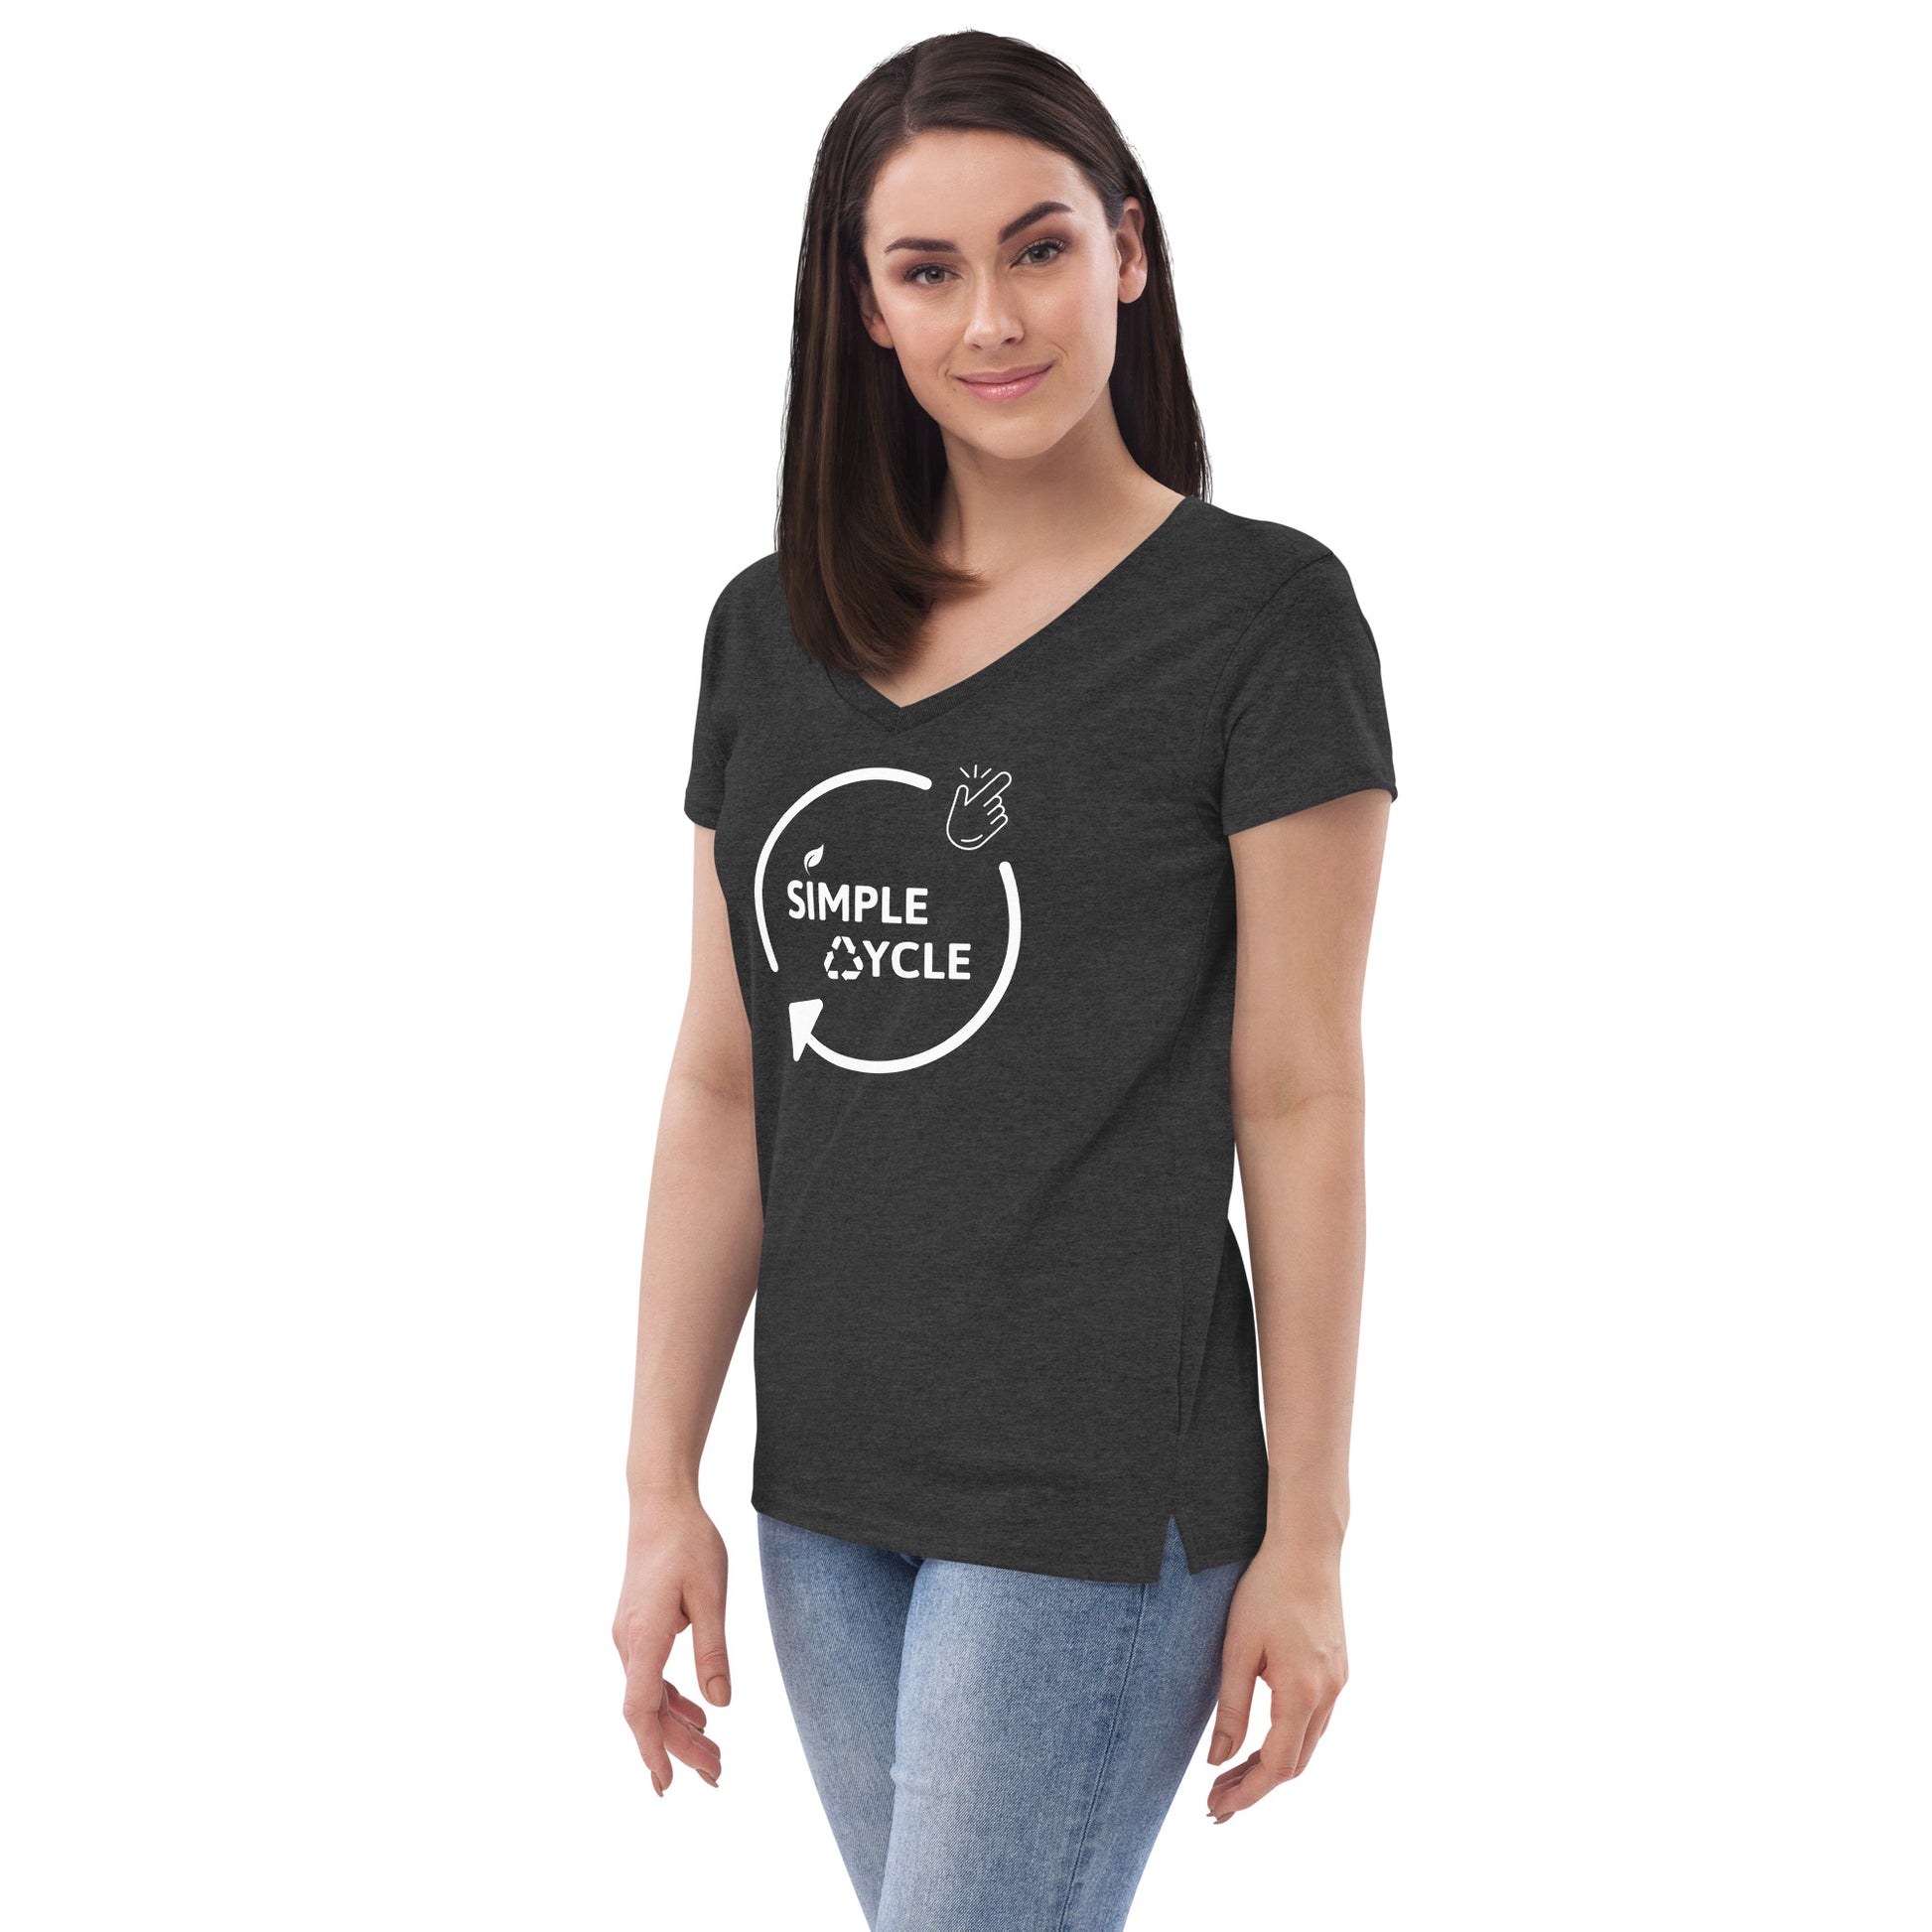 SimpleCycle Women’s Recycled V-Neck T-Shirt charcoal front left